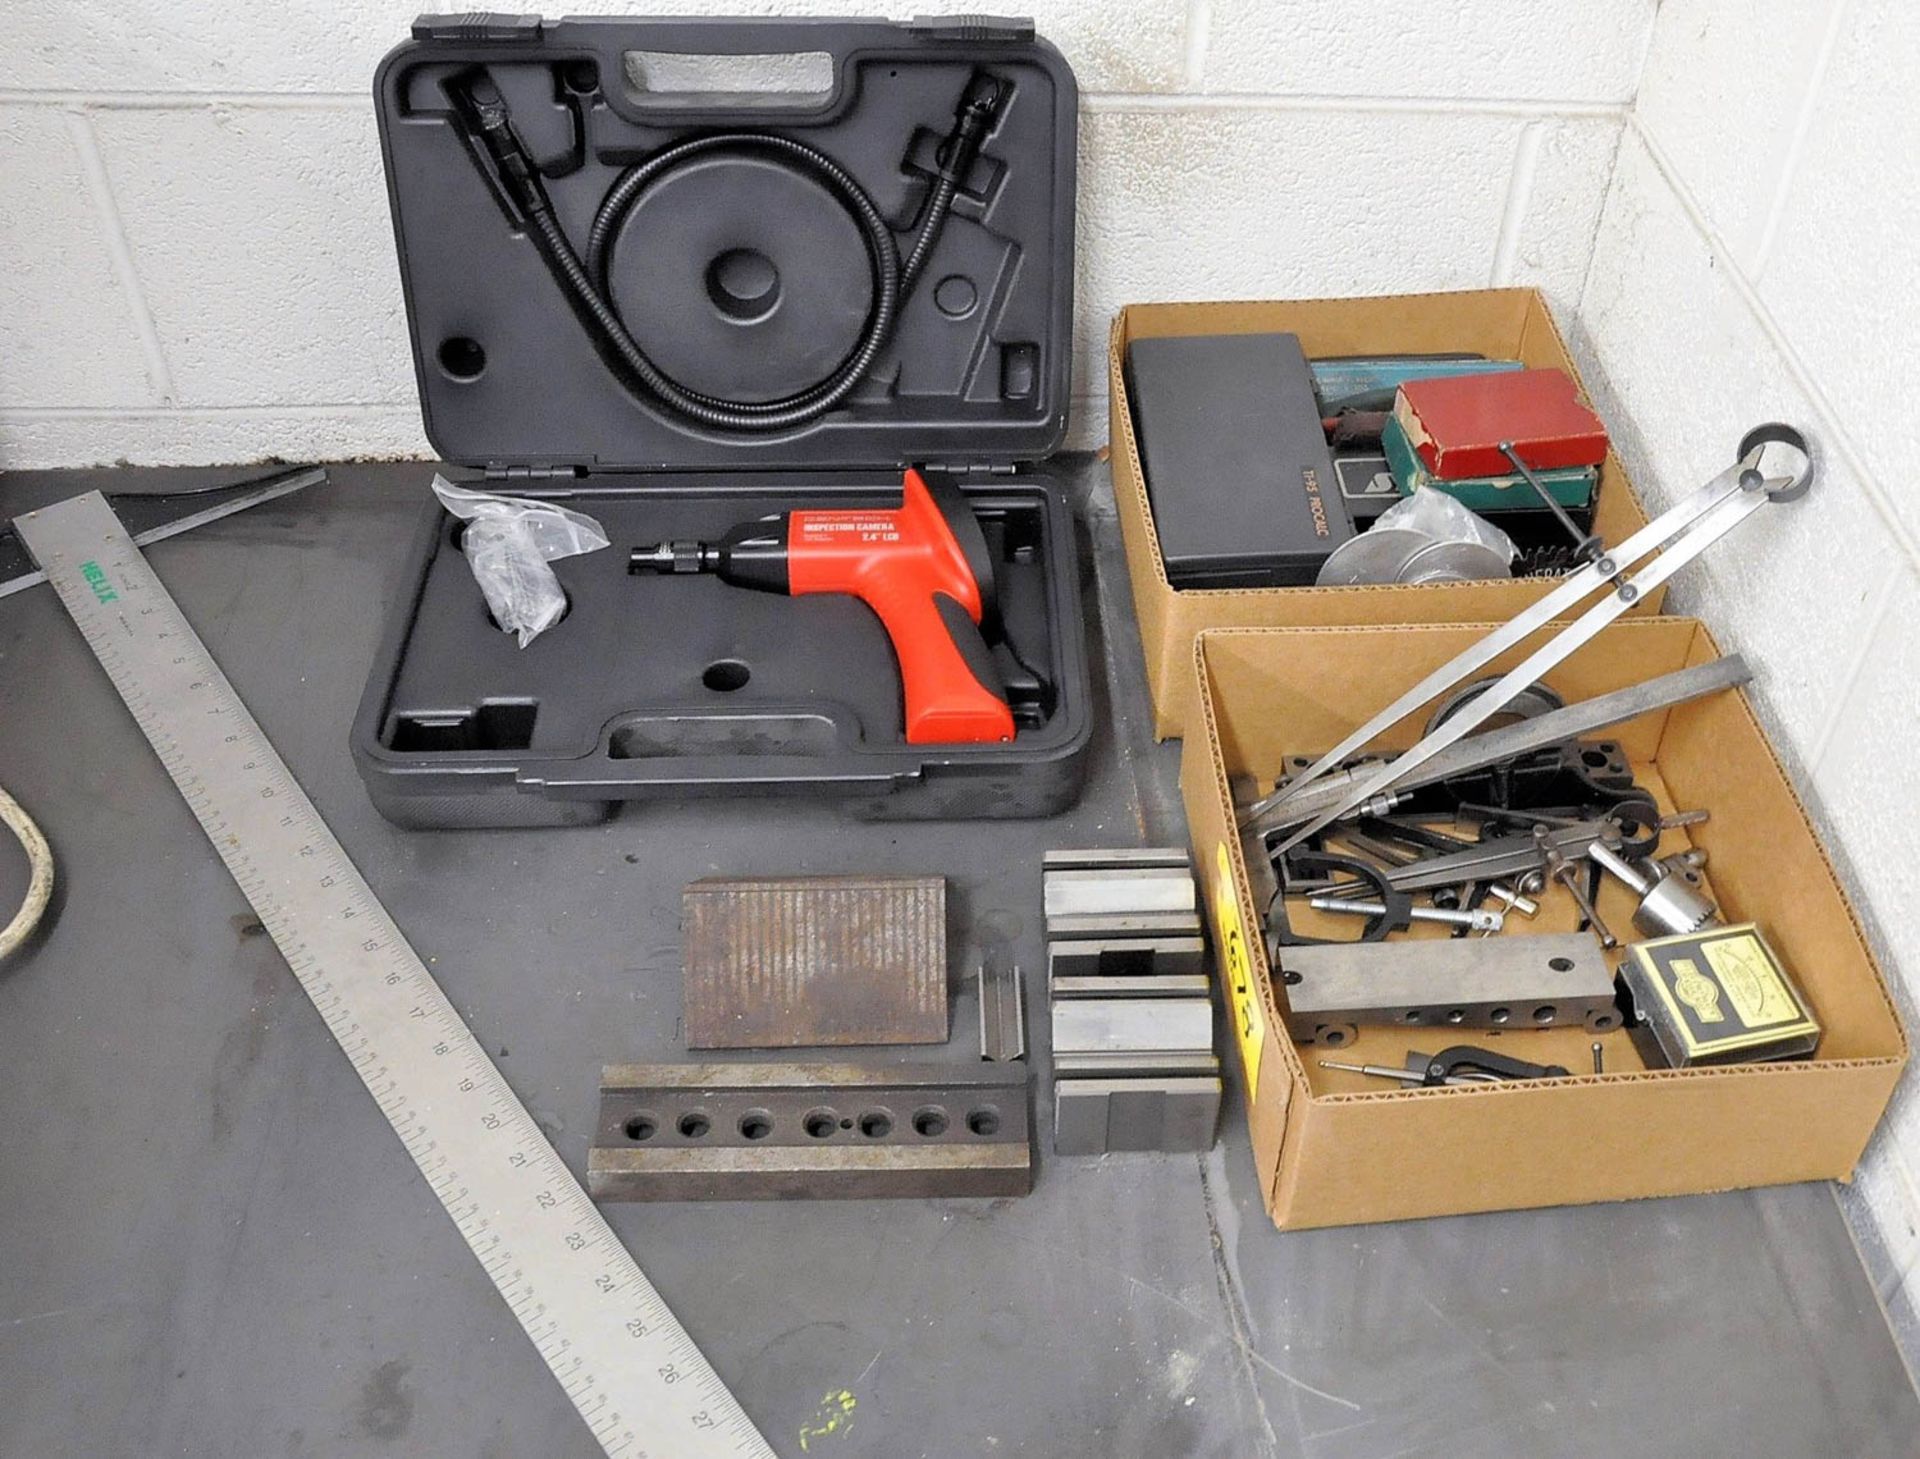 (1) Centech Inspection Camera with Case and Assorted Inspection on Desktop with Dial Indicators in